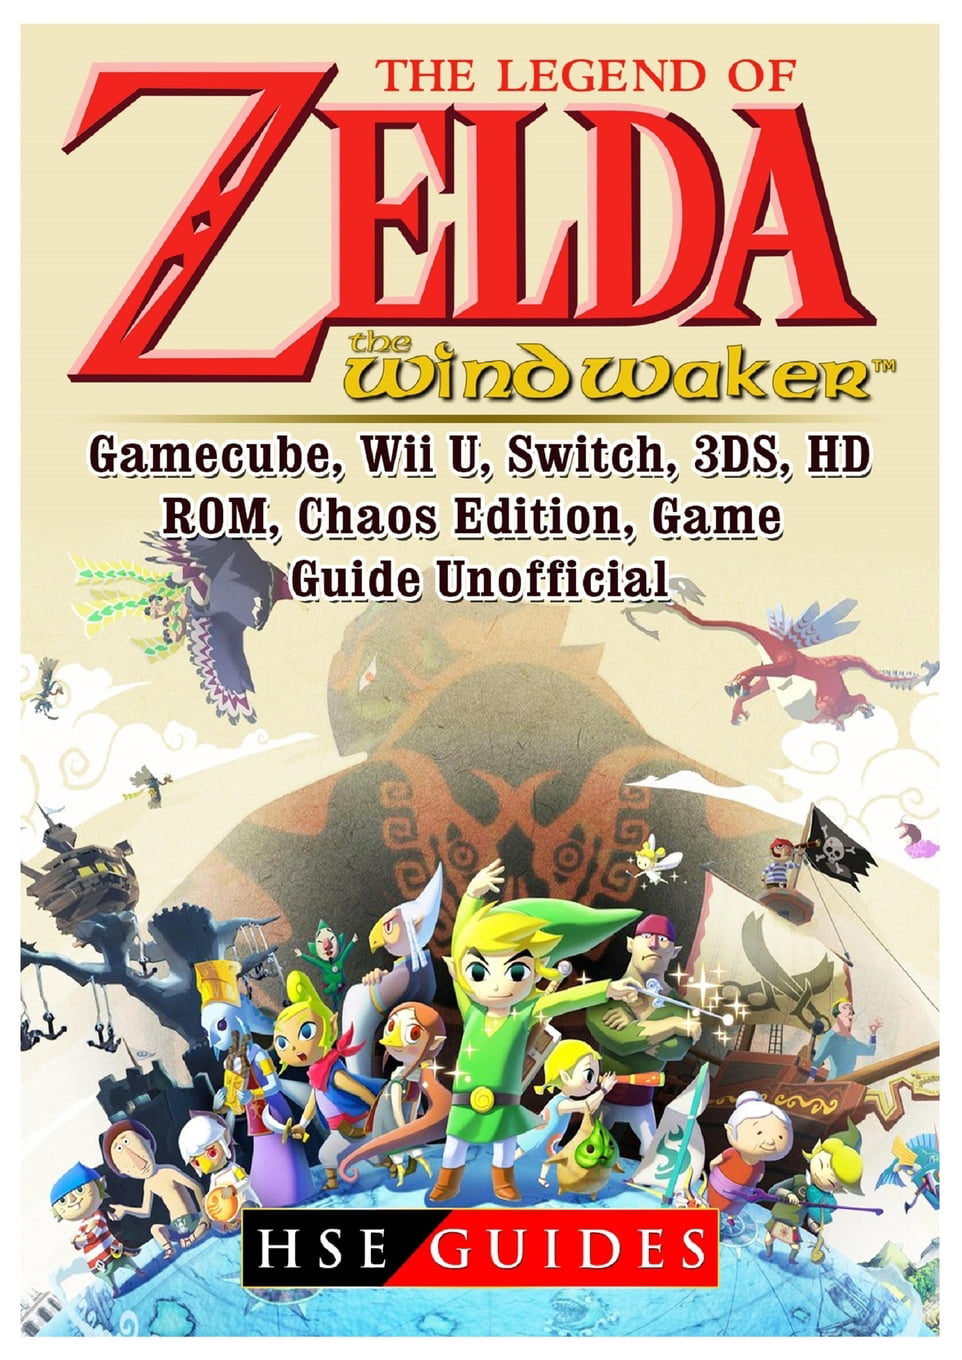 Legend of Zelda the Waker, Gamecube, Wii U, Switch, 3ds, Hd, Rom, Chaos Game Guide Unofficial - Walmart.com